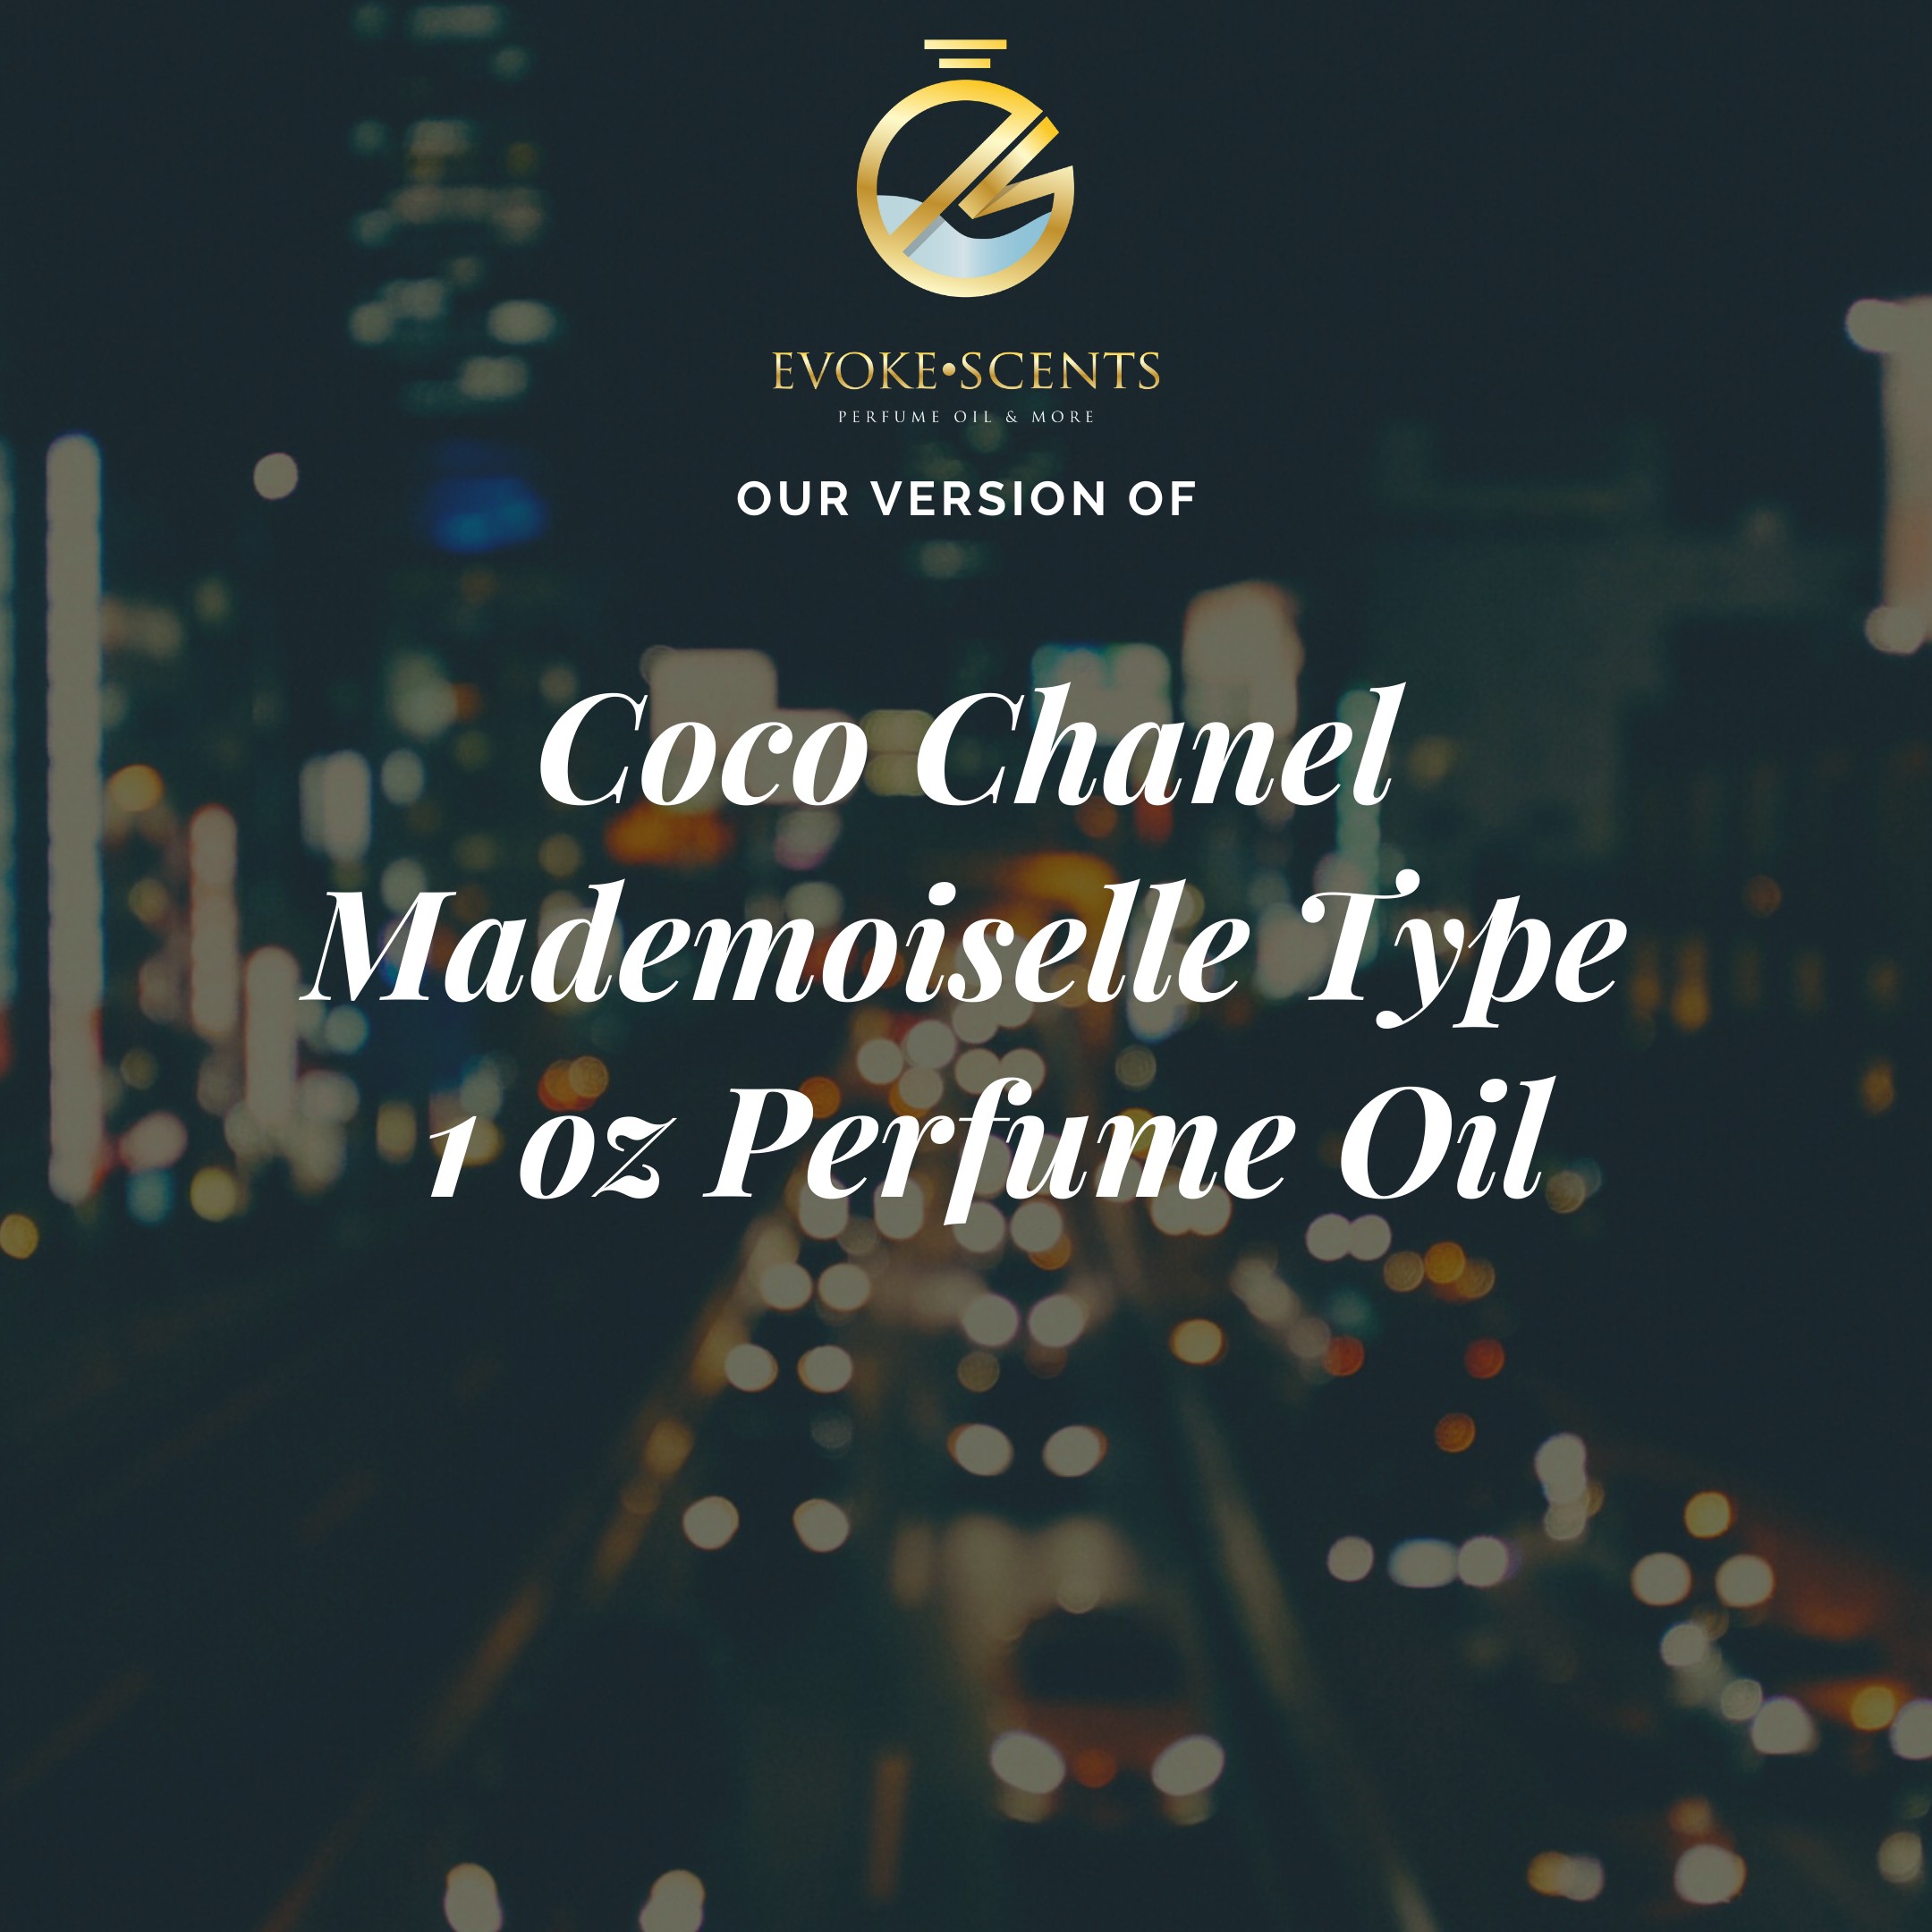 CHANEL COCO MADEMOISELLE THE BODY OIL